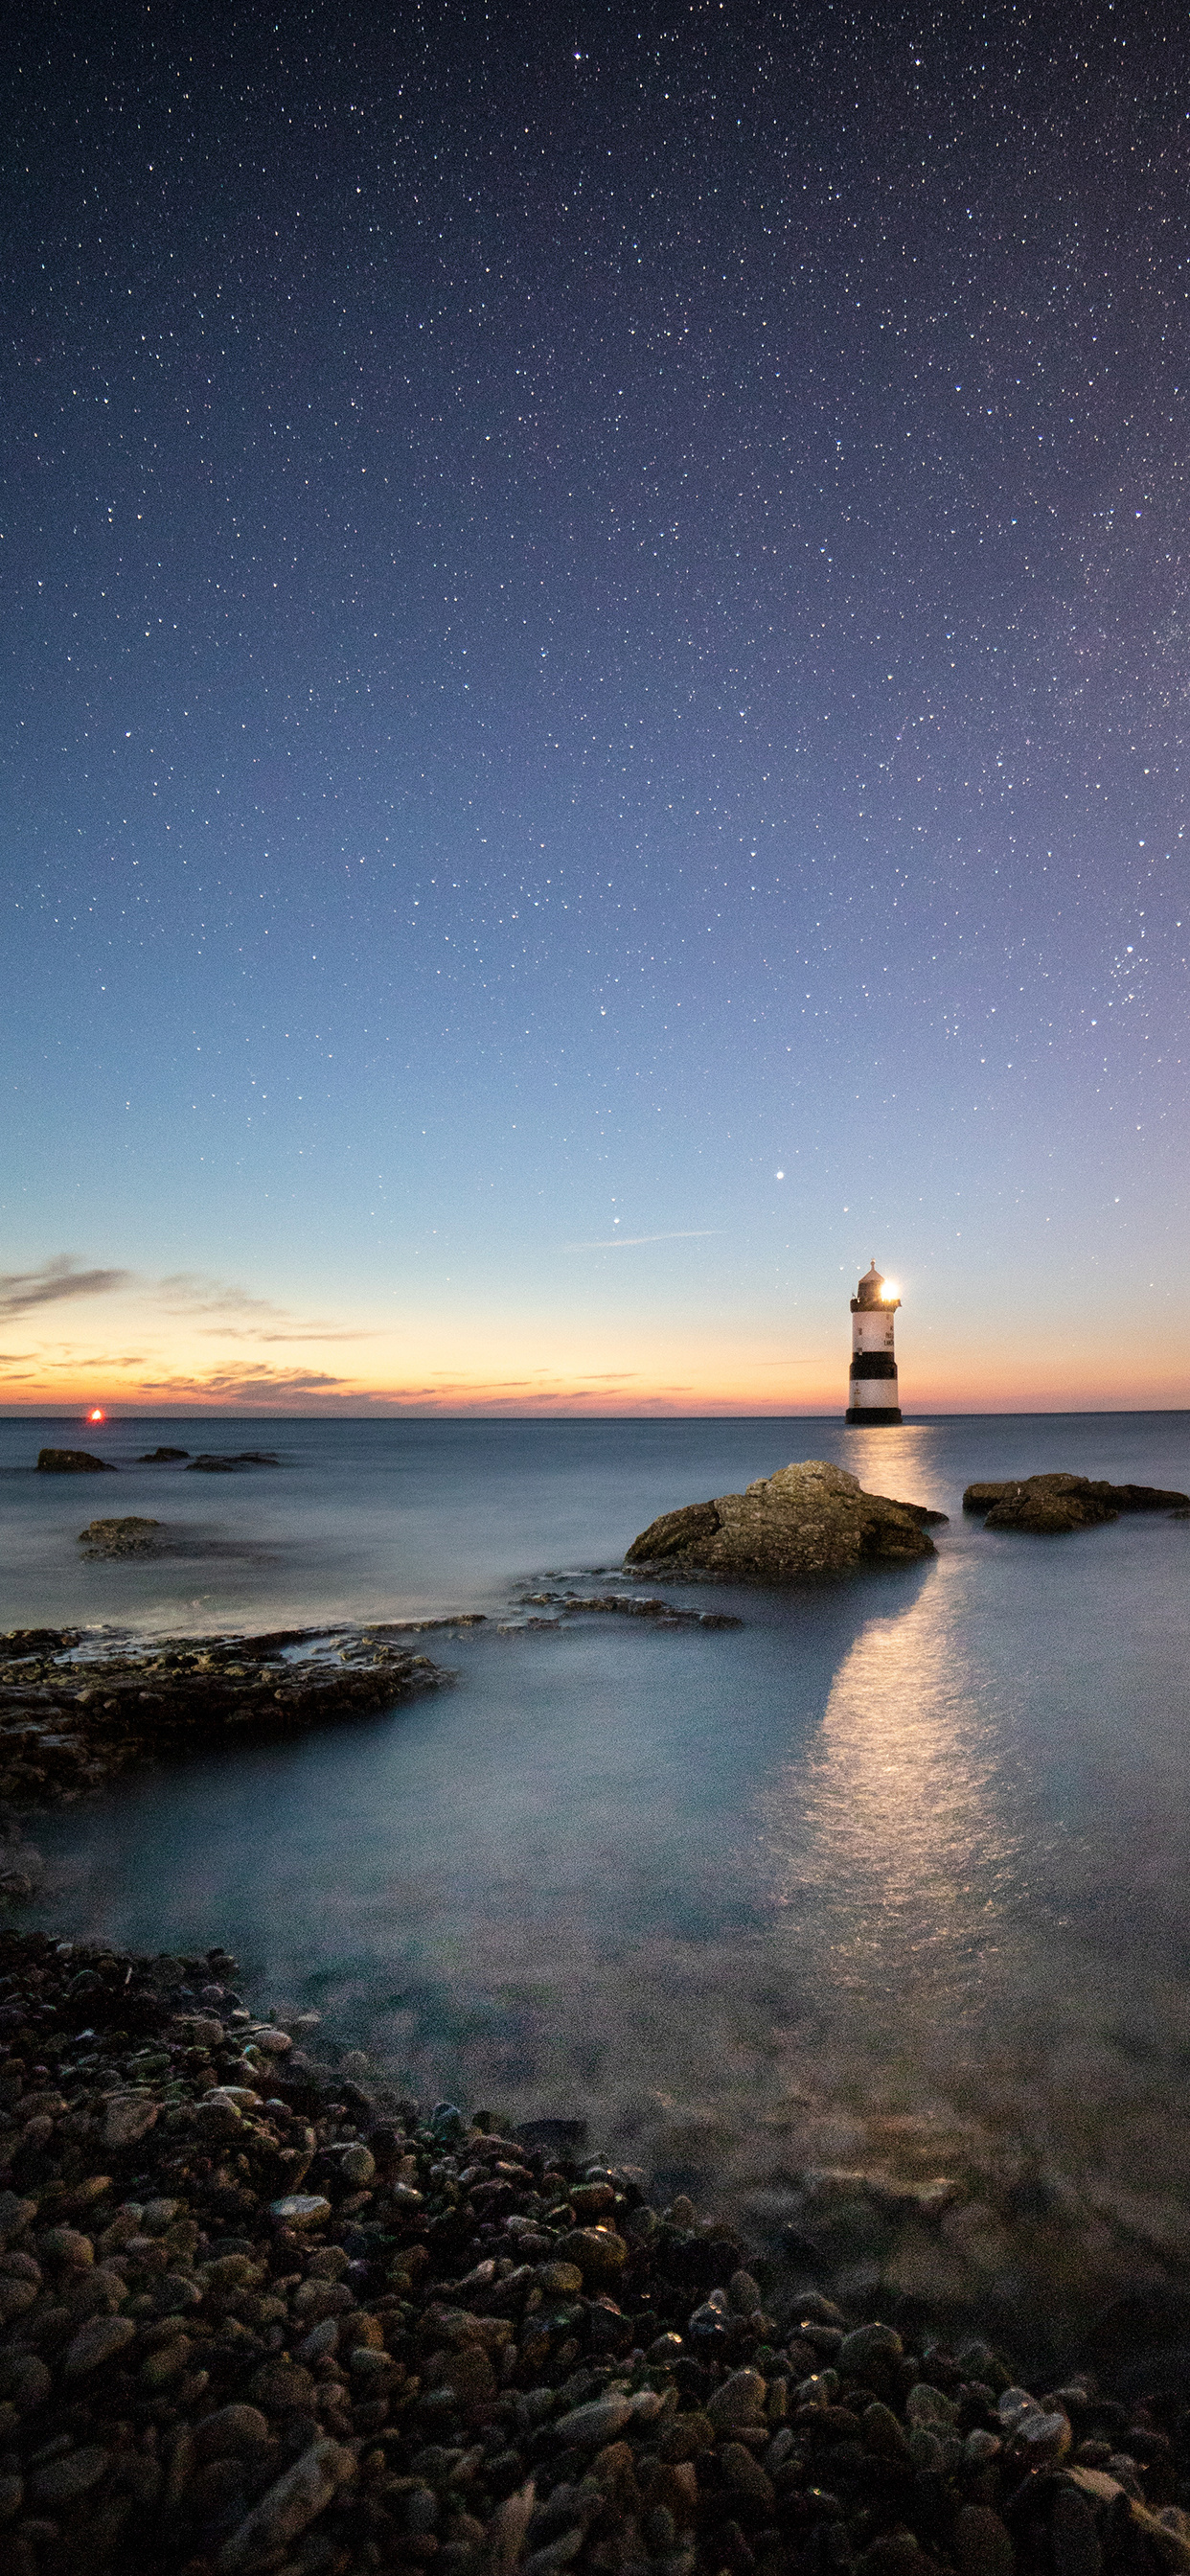 iPhone wallpaper, Lighthouse for all devices, Free download, Captivating, 1250x2690 HD Phone